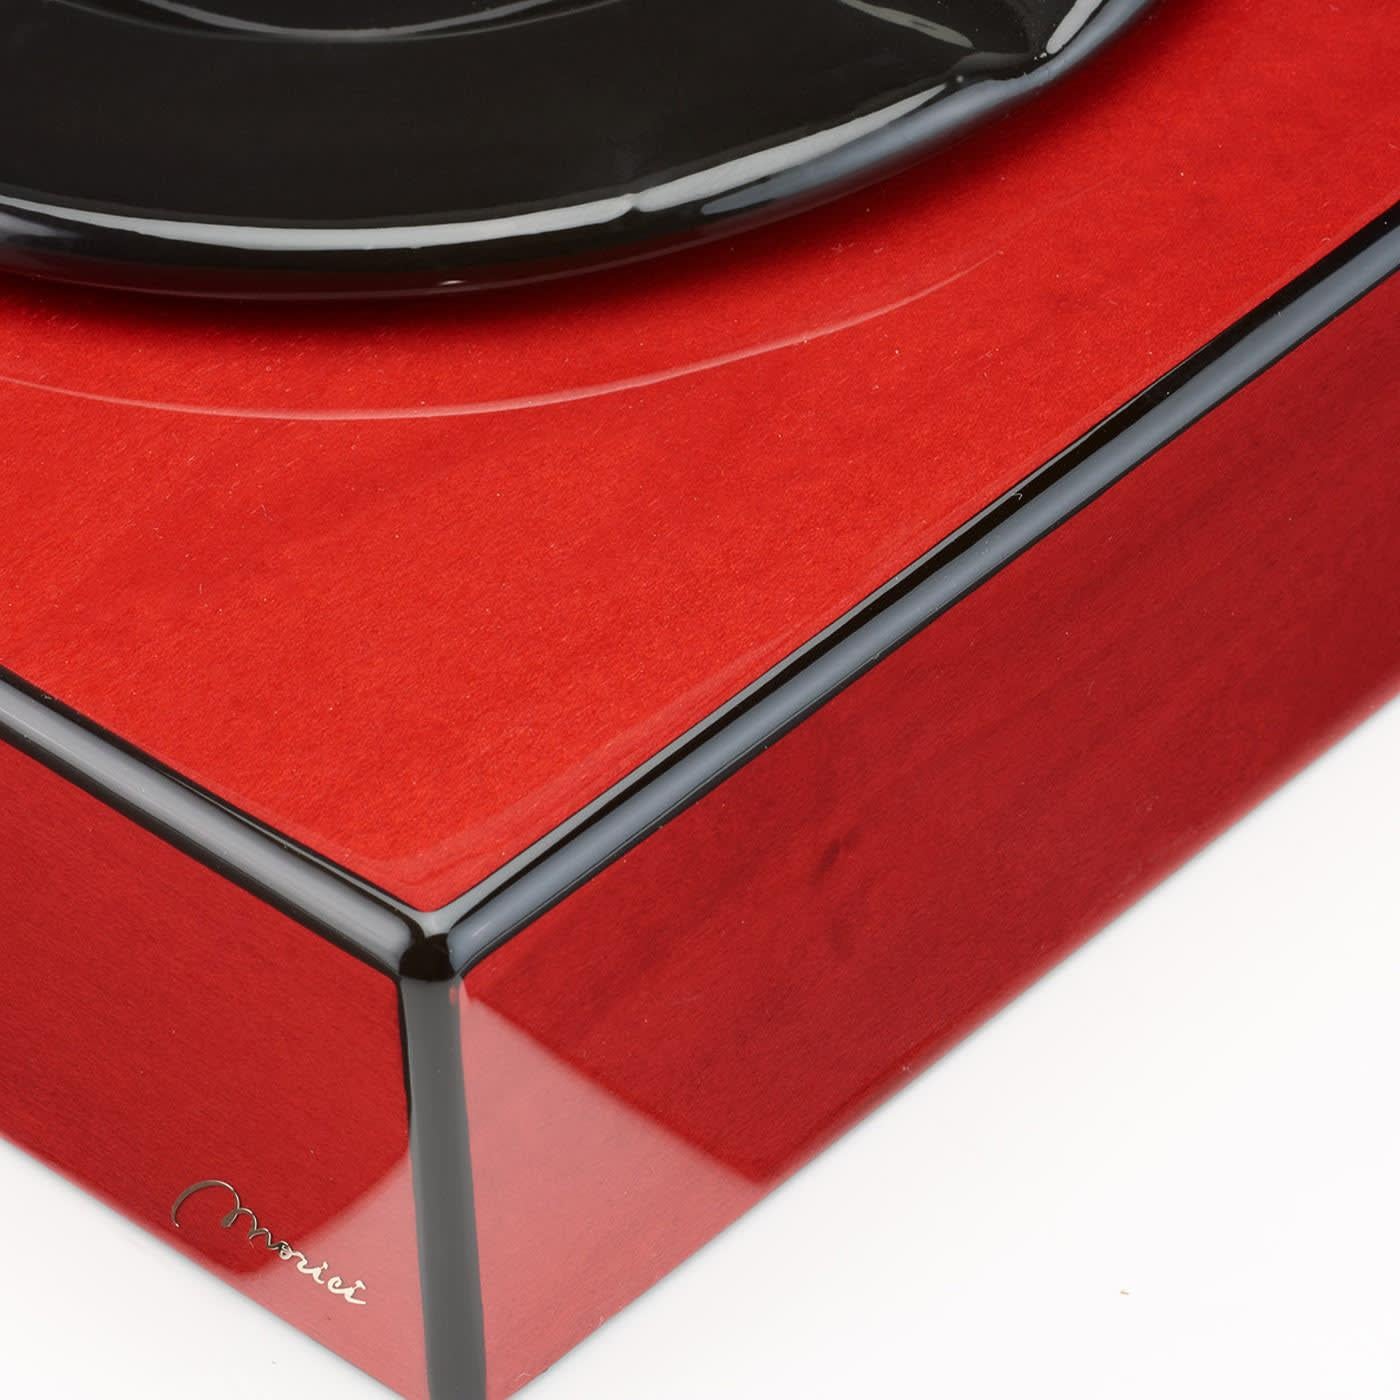 Distinguished by splendid natural veinings and grains, shining through polished red and black paint decorating its clean and classic shape, this ashtray turns an everyday object into an exclusive icon of contemporary design. Handmade of wood and